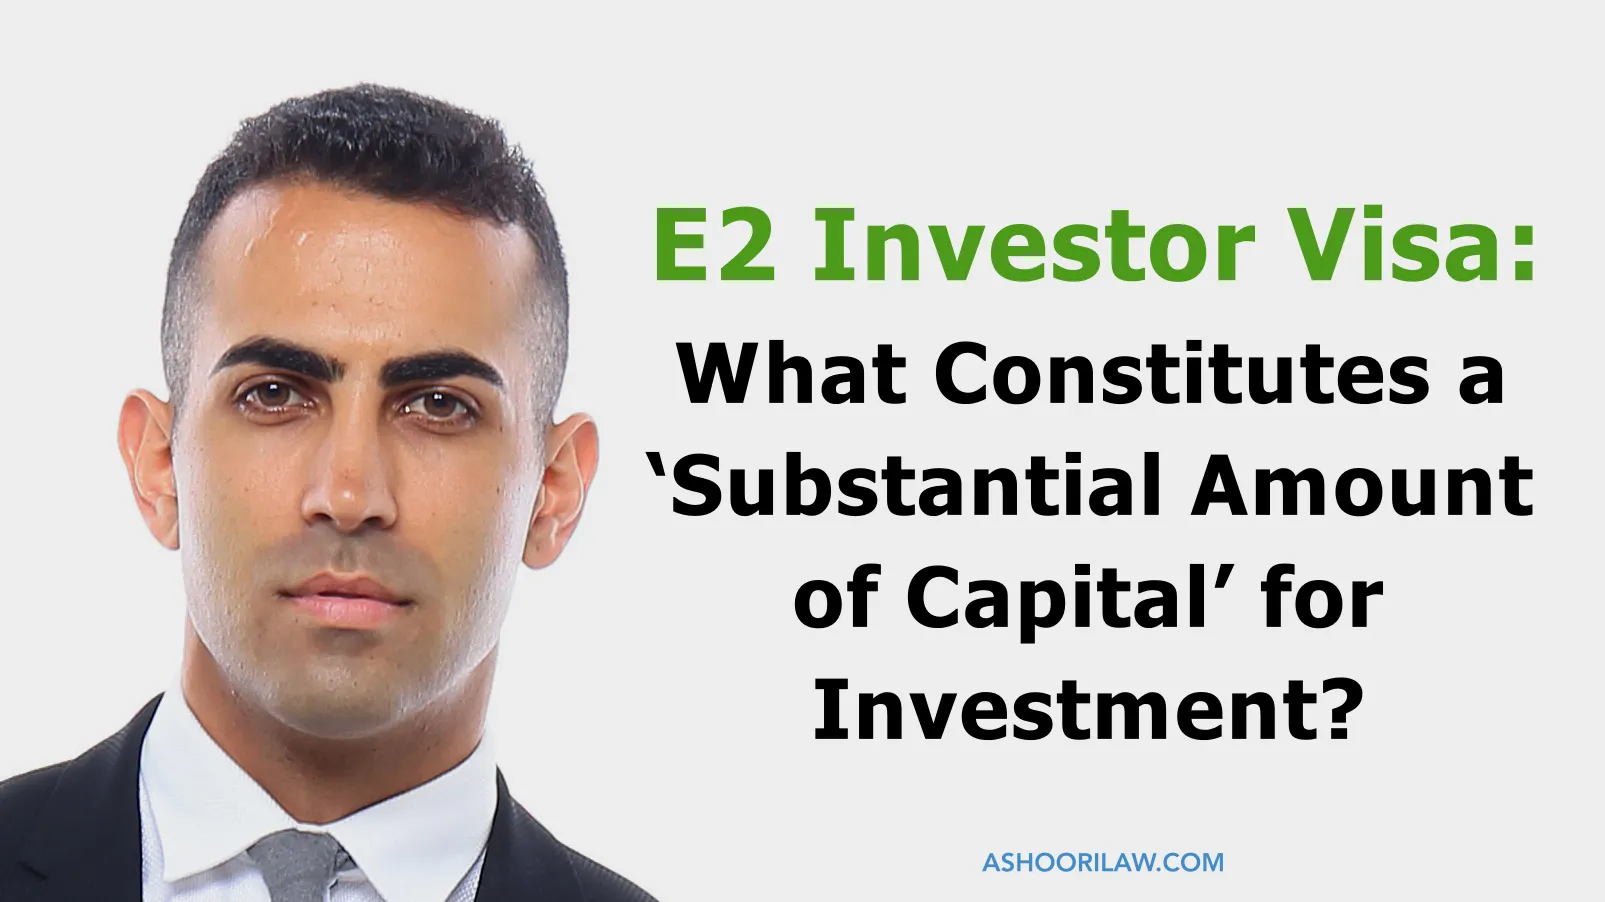 E2 Investor Visa-What Constitutes A Substantial Amount of Capital for Investment?